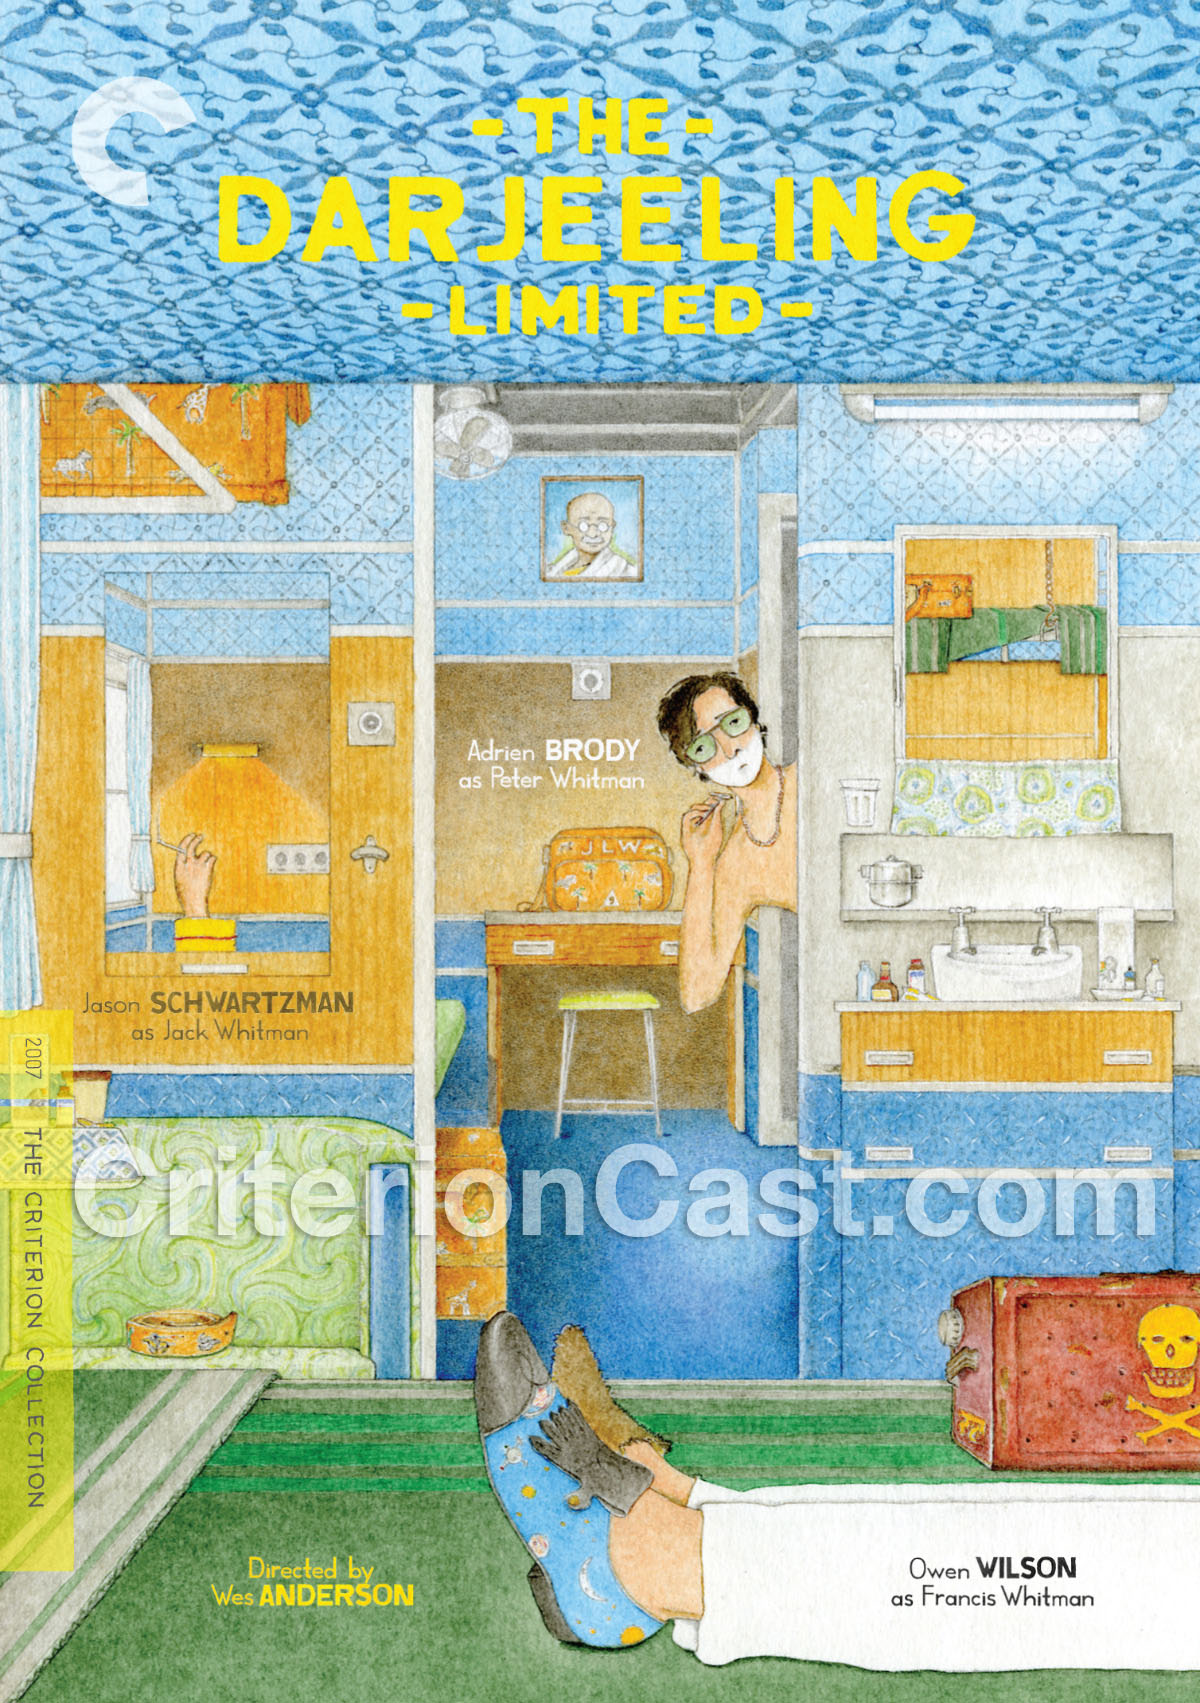 THE DARJEELING LIMITED POSTER A4 A3 A2 A1 CINEMA MOVIE LARGE FORMAT